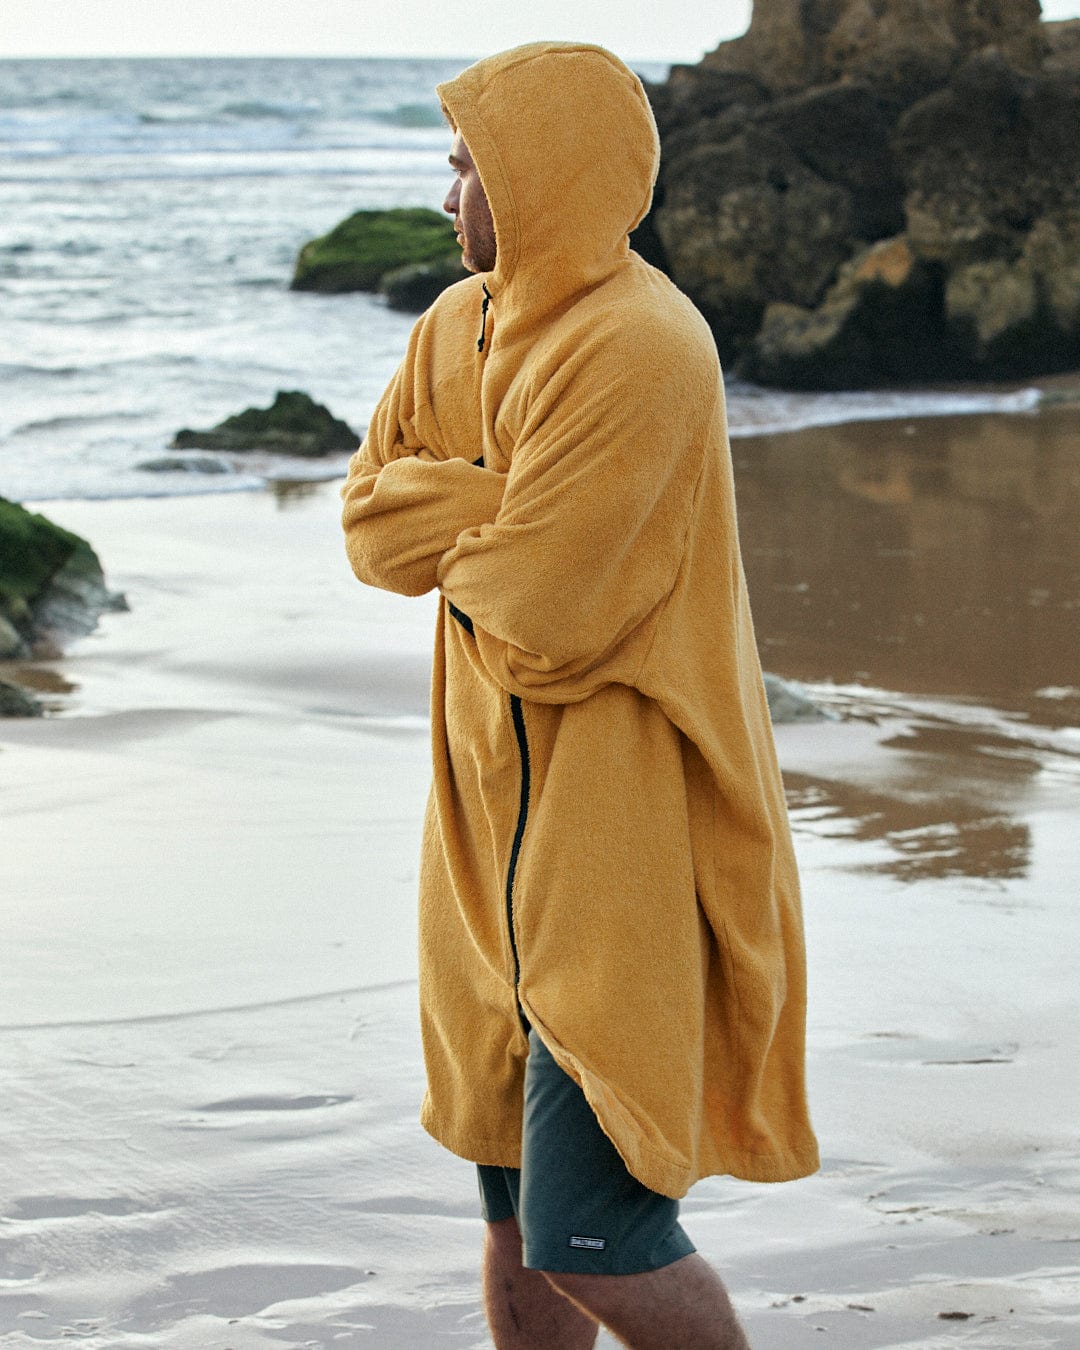 Man in a Saltrock 3 in 1 Recycled Four Seasons Changing Robe - Black/Yellow standing on a beach, looking out at the water, with rocks and sand visible around him.